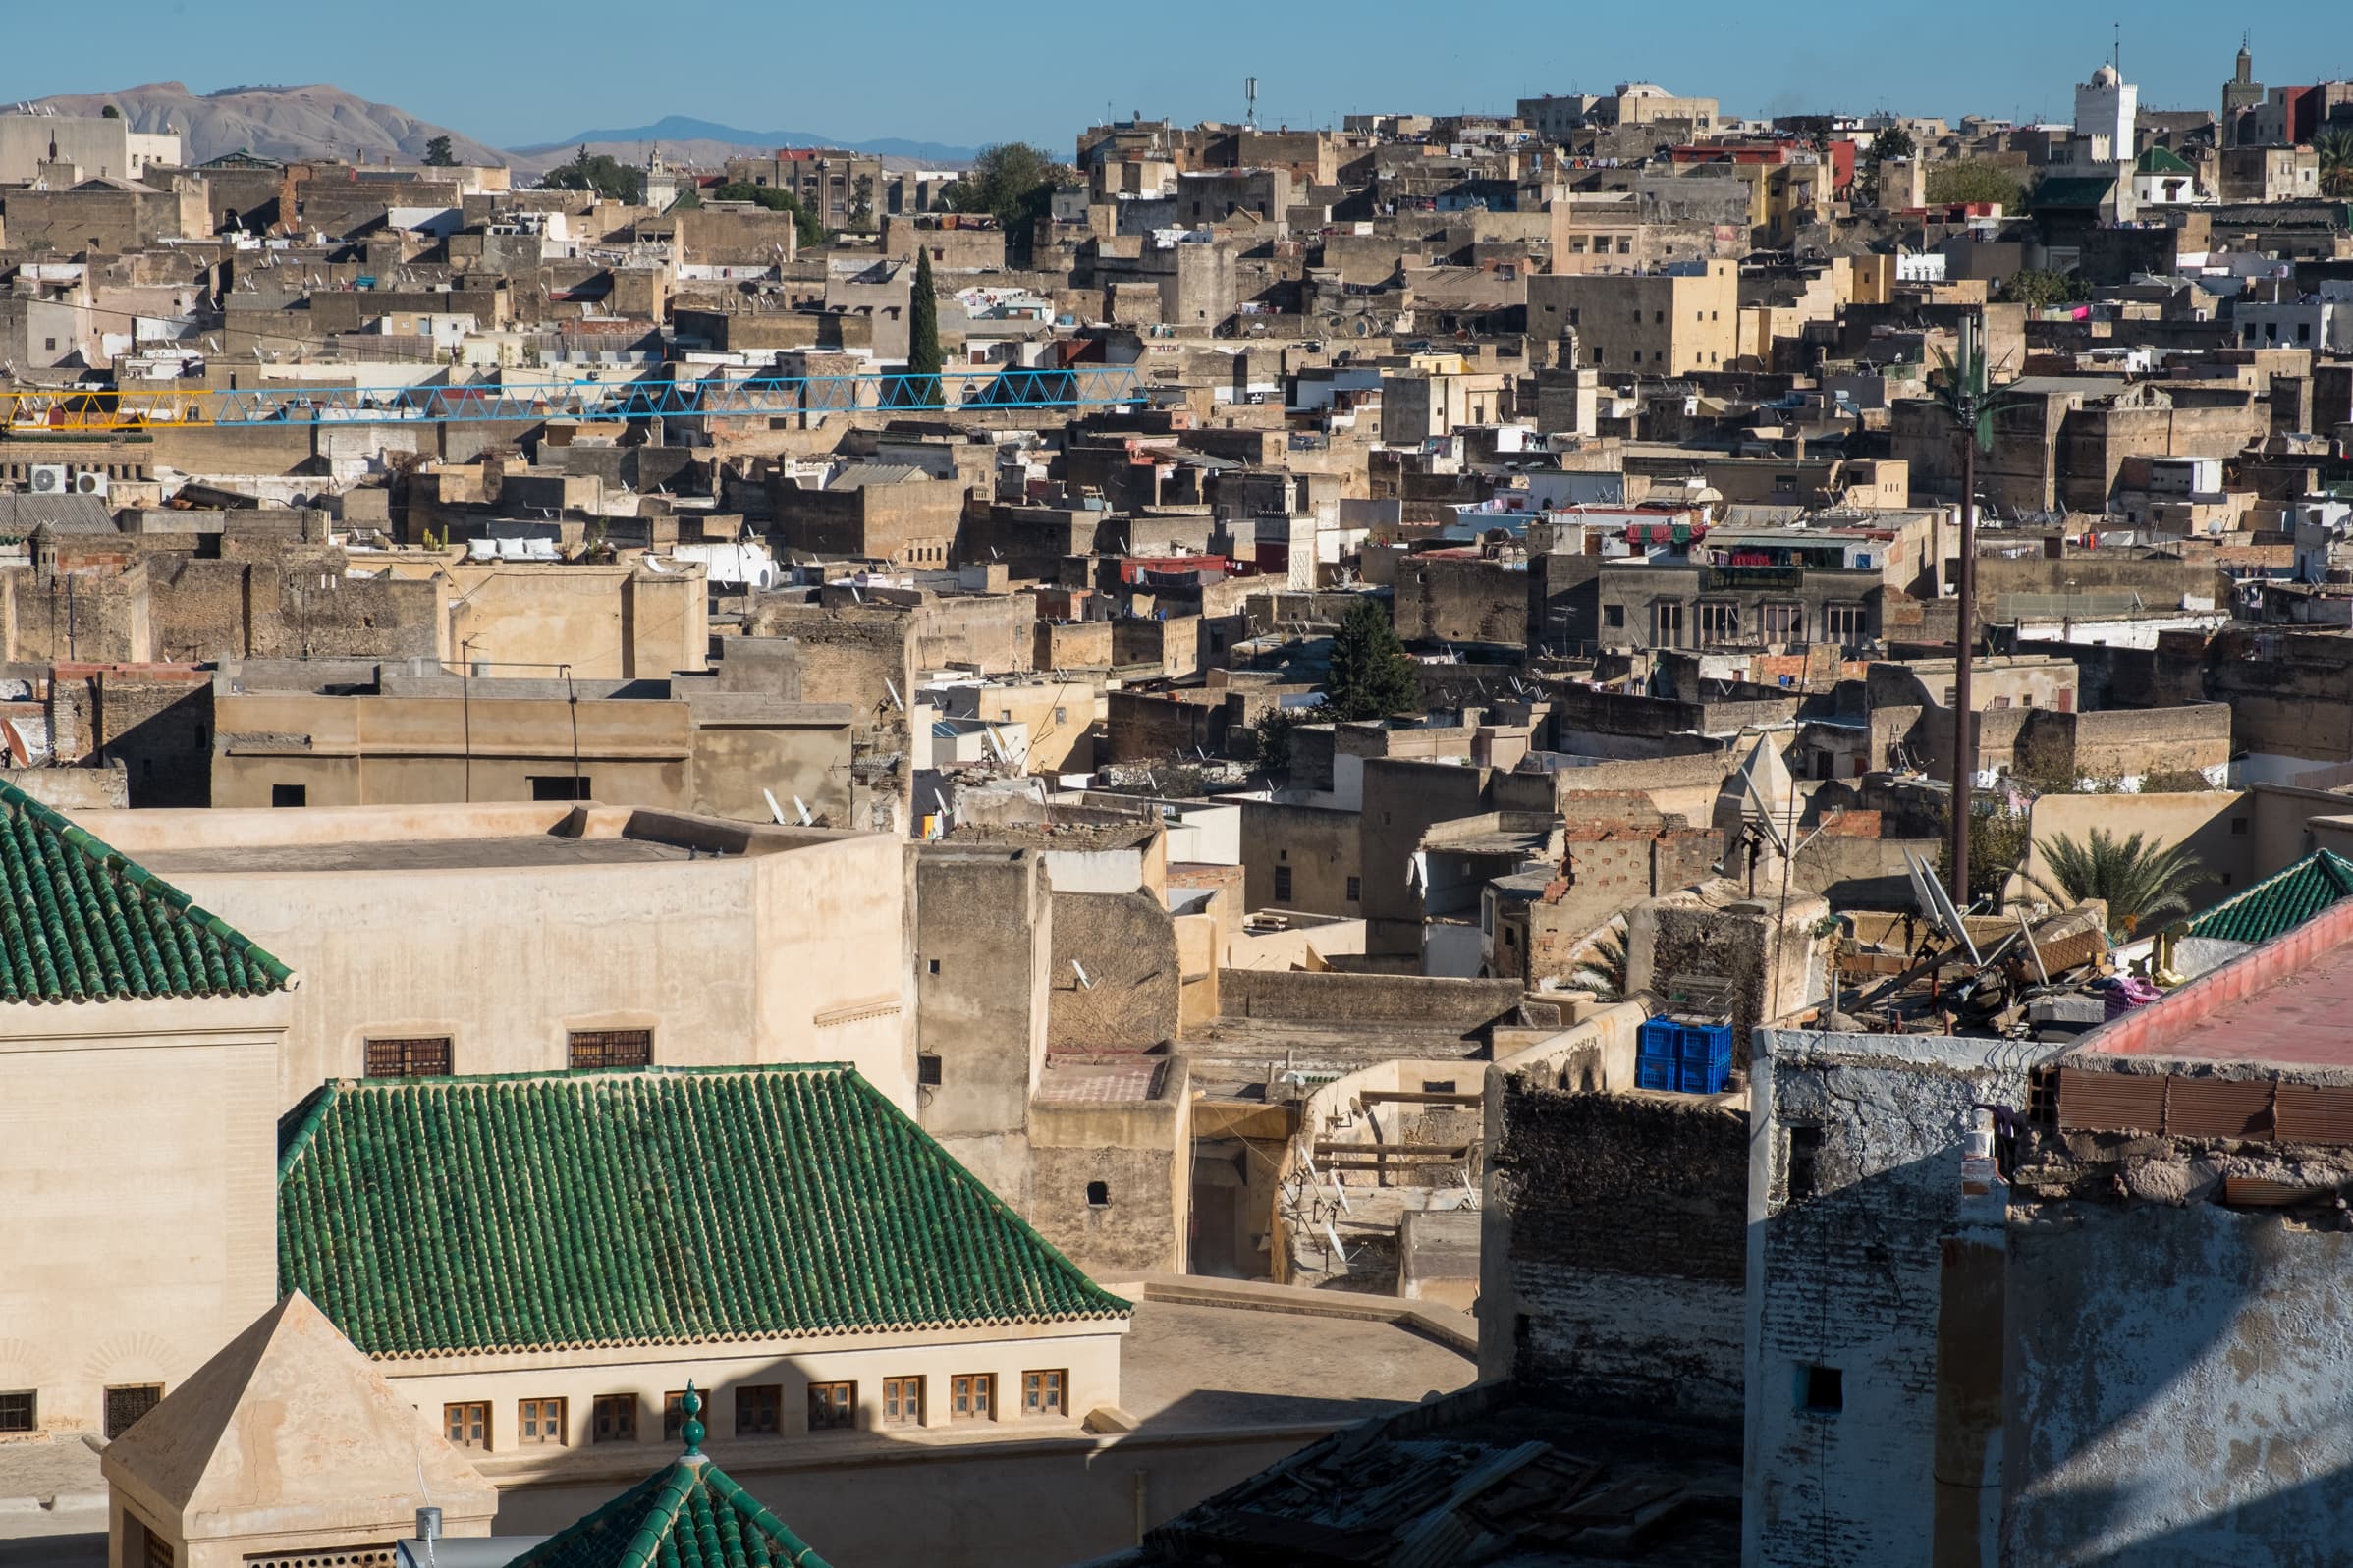 Buildings lining the hills of Fez from a rooftop